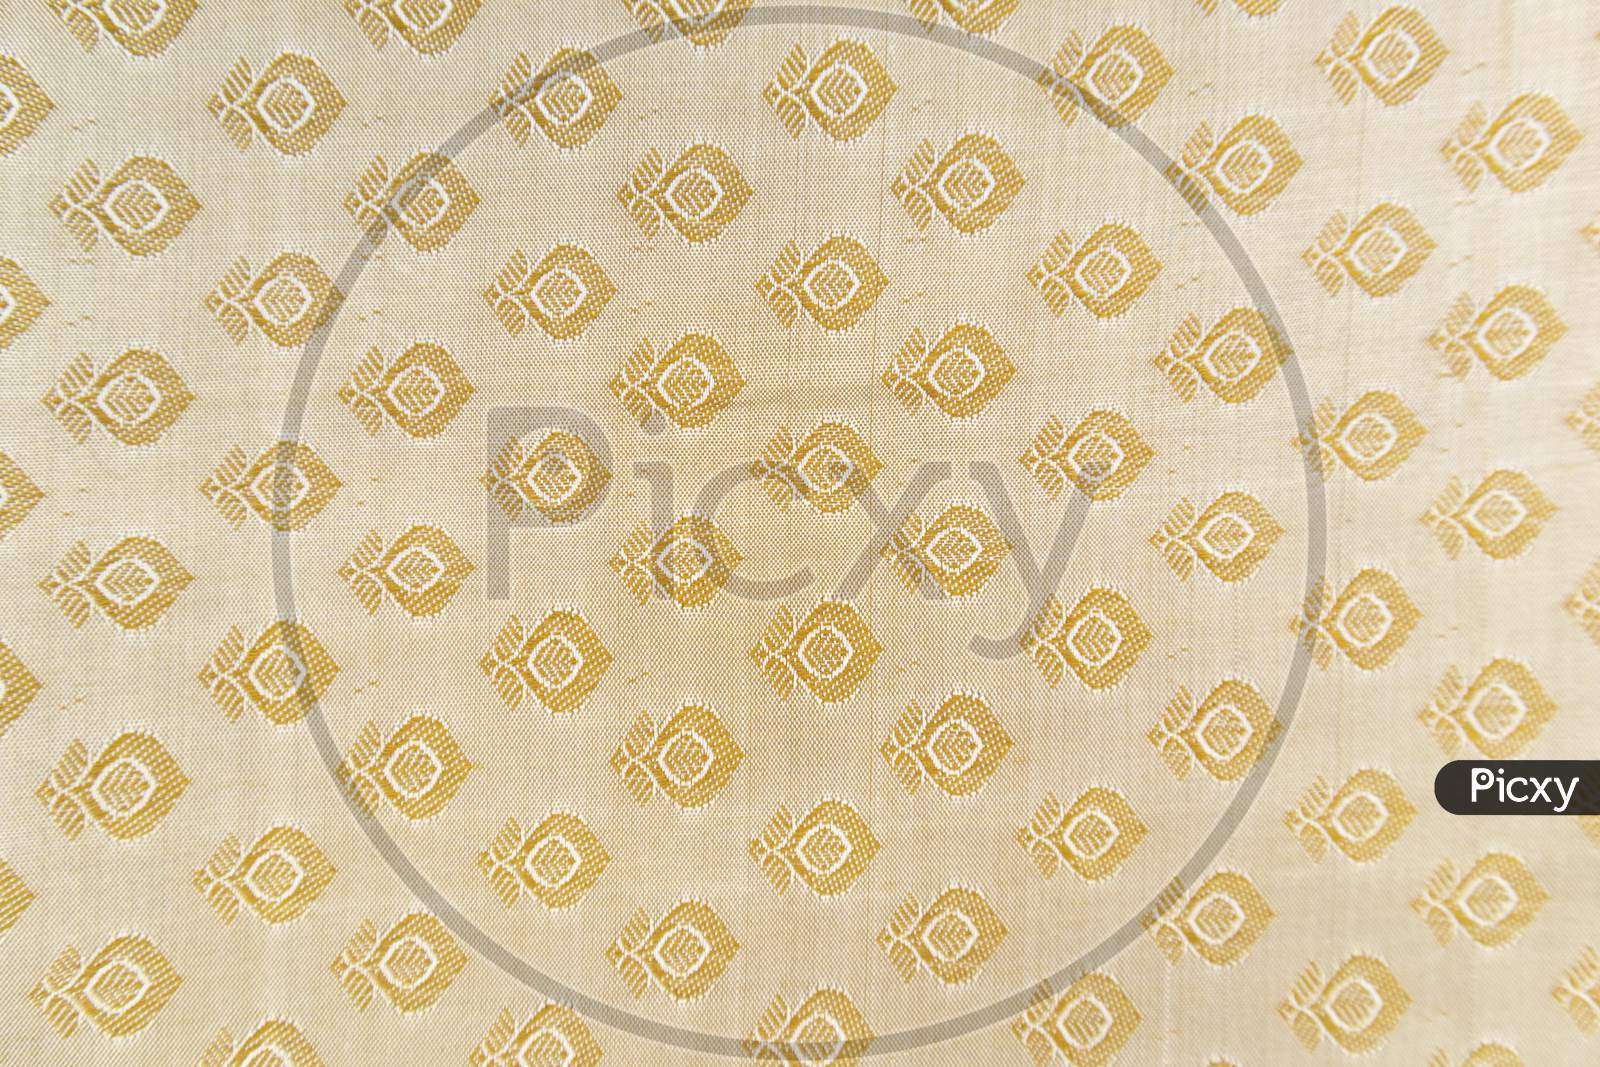 Maski, India - October ,6 2019 - Traditional Indian Silk Saree Border Pattern With Golden Bright Colors And Floral Design.